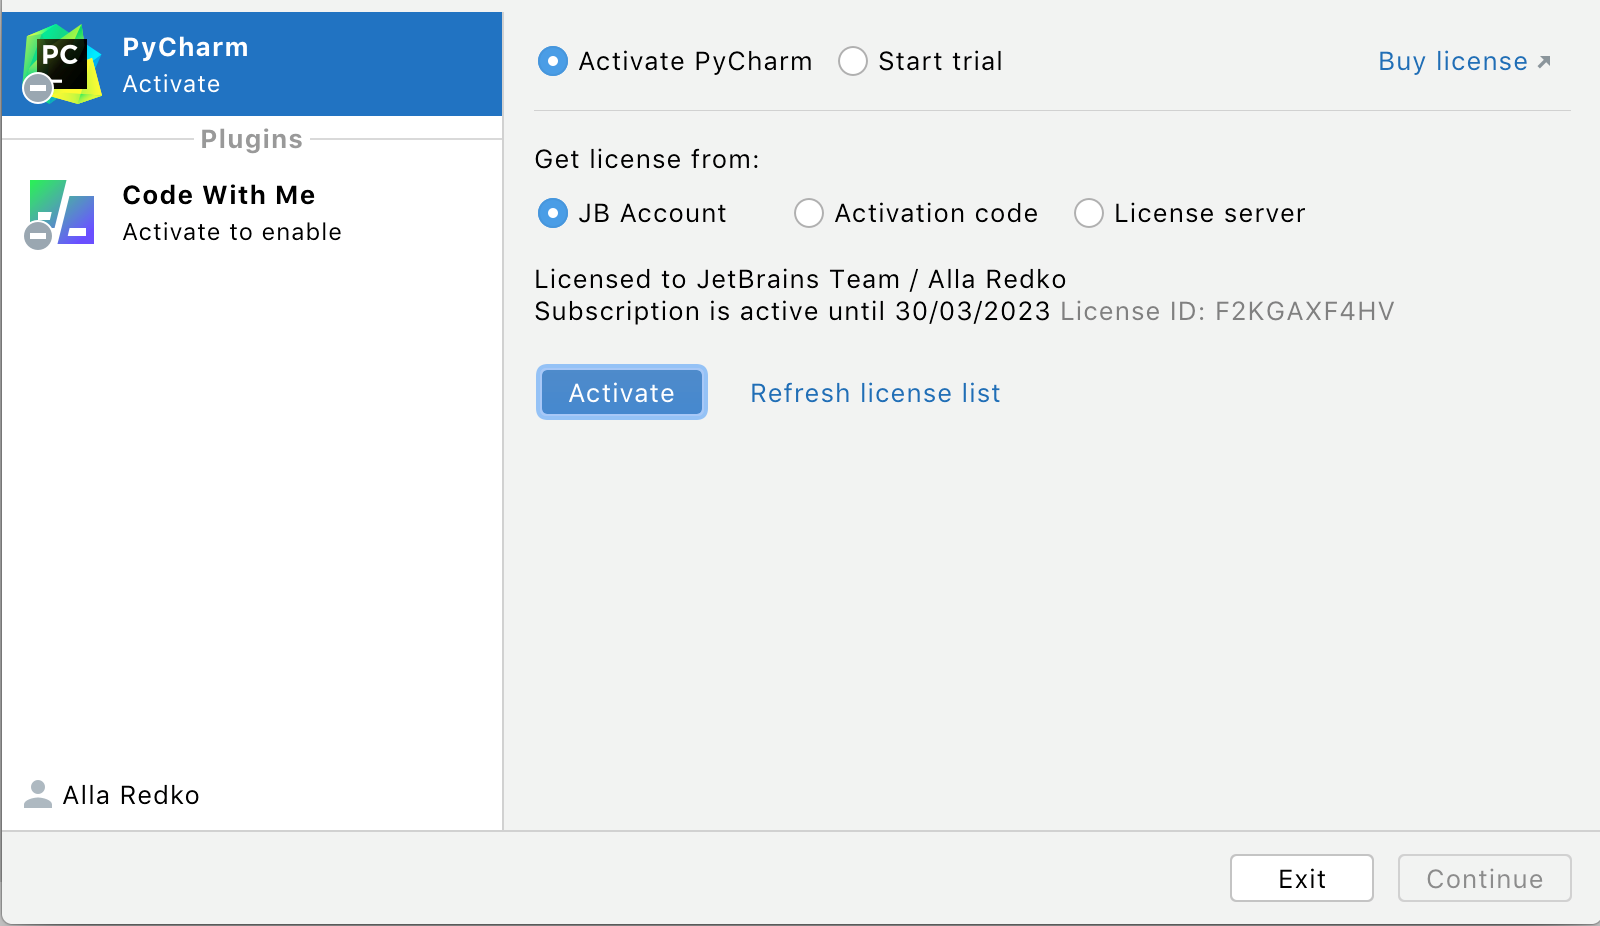 Activate PyCharm license with a JB Account